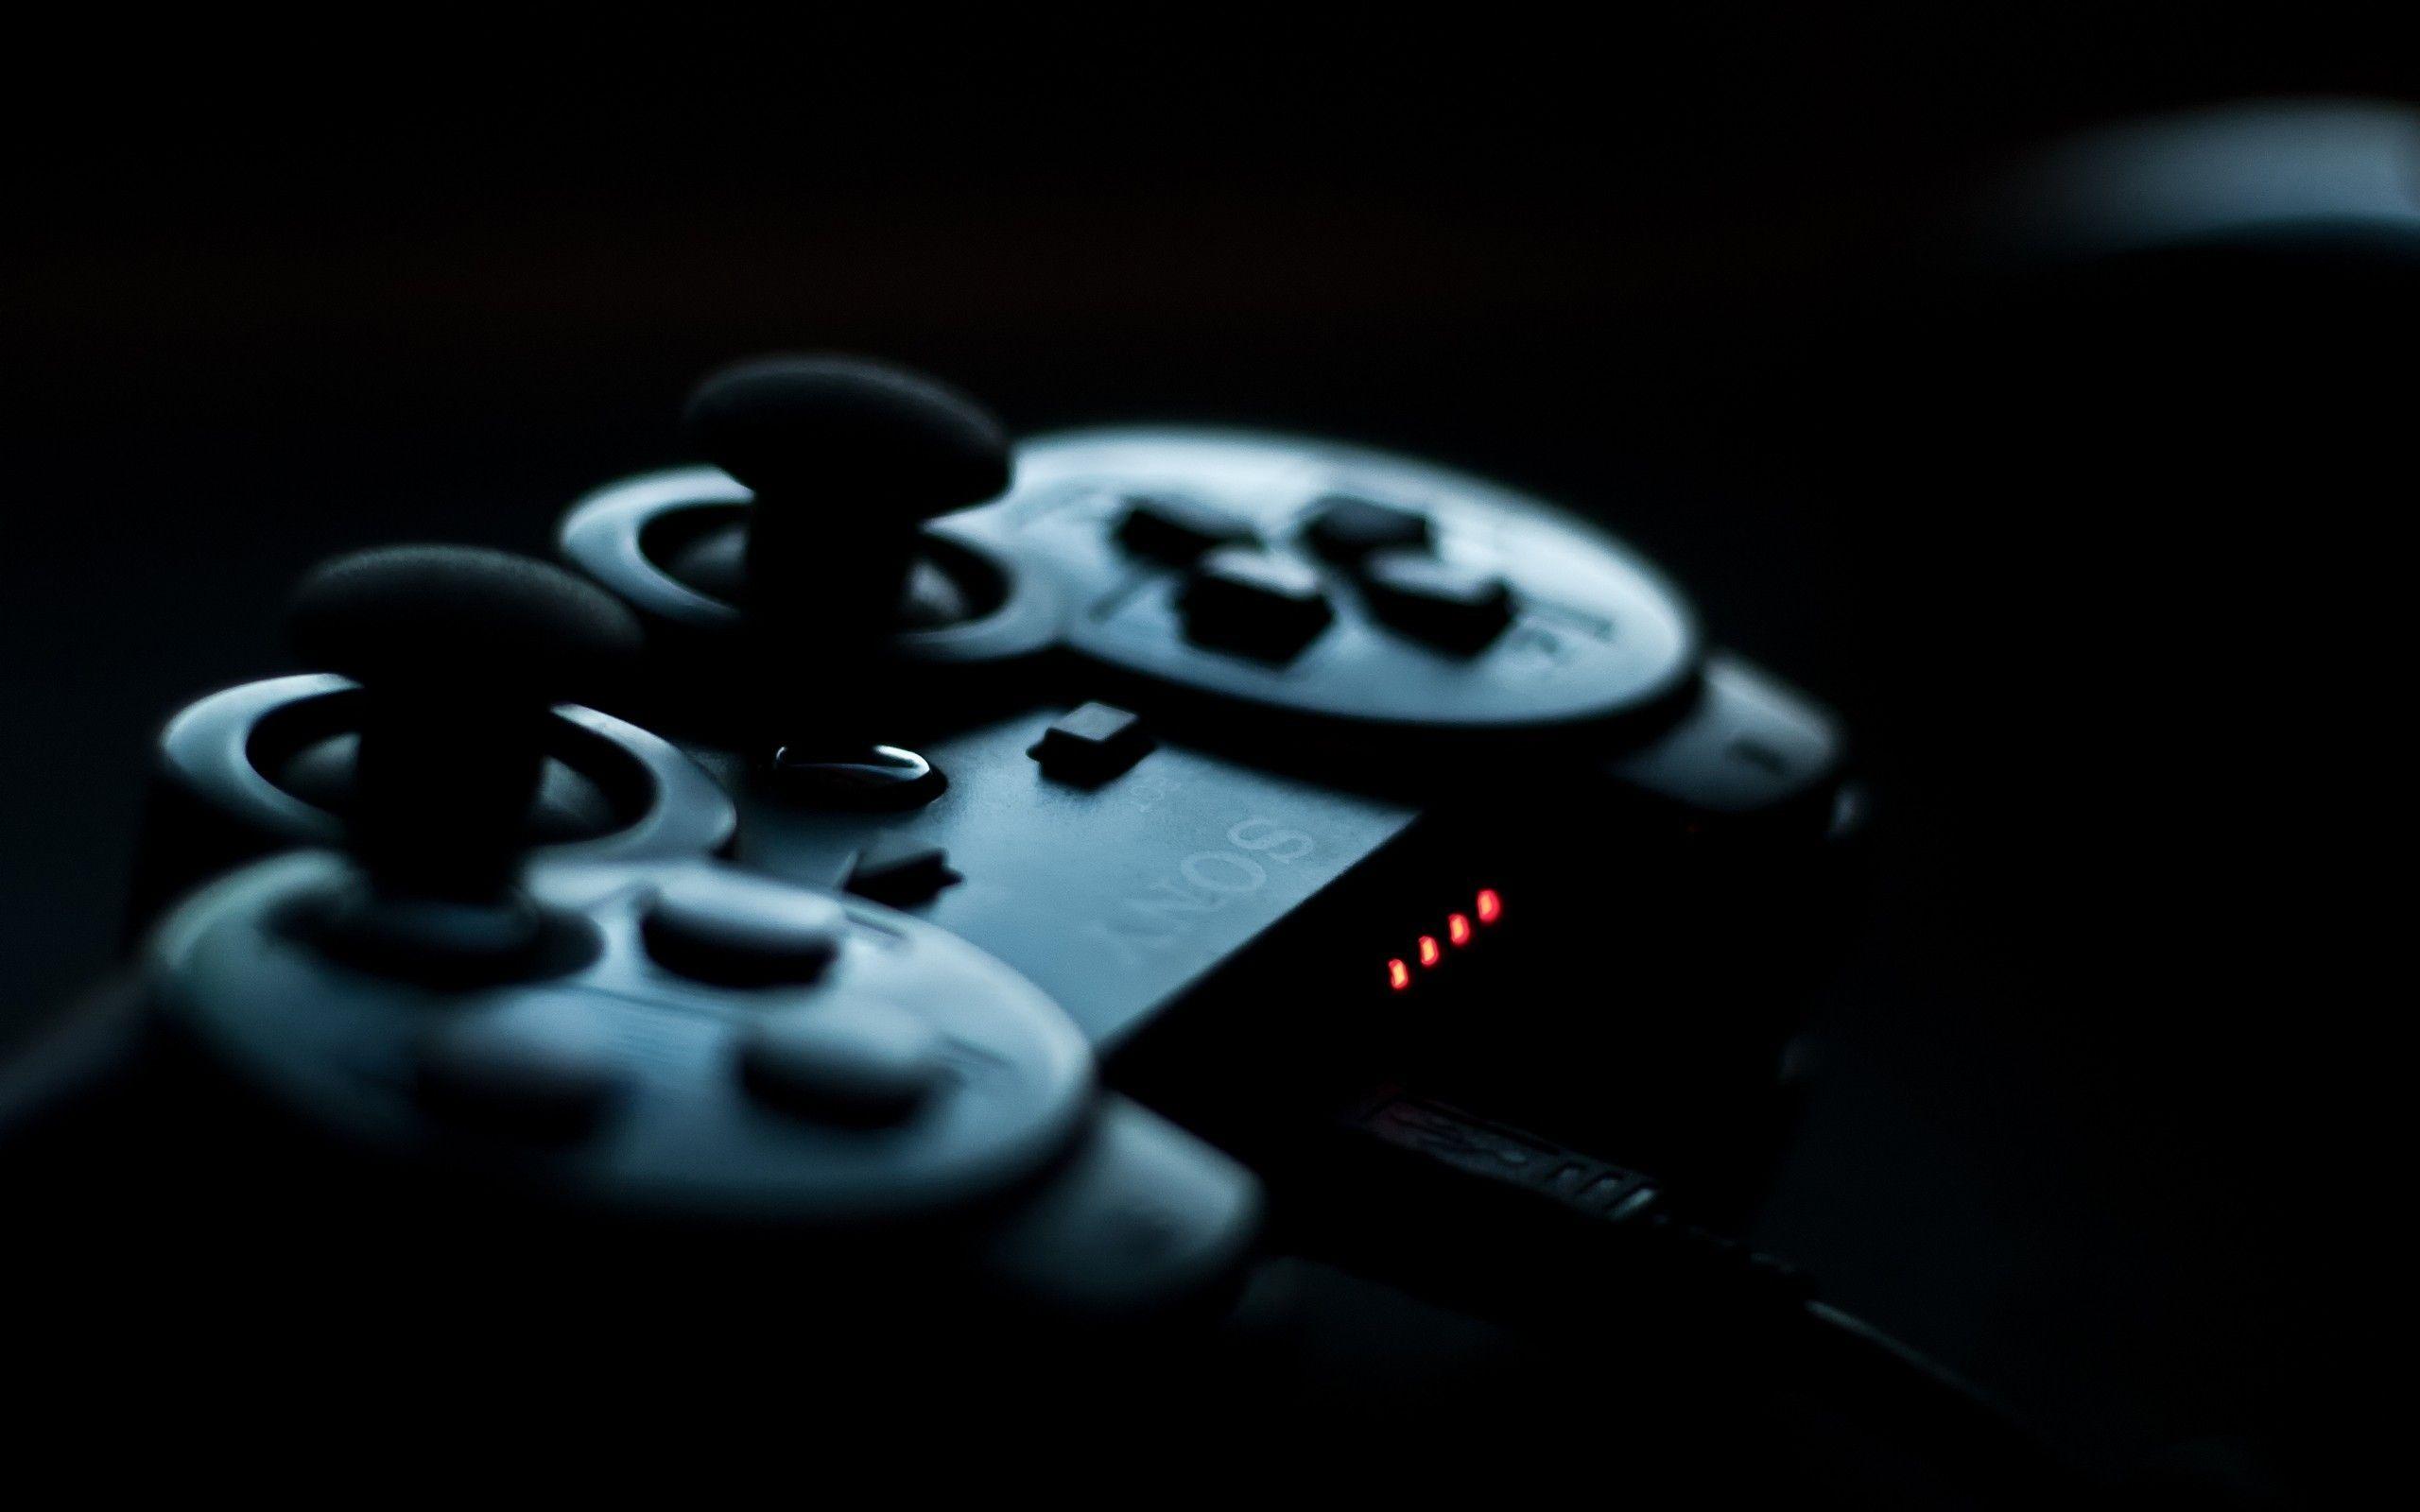 Game Controller Wallpapers Wallpaper Cave Download, share or upload your own one! game controller wallpapers wallpaper cave